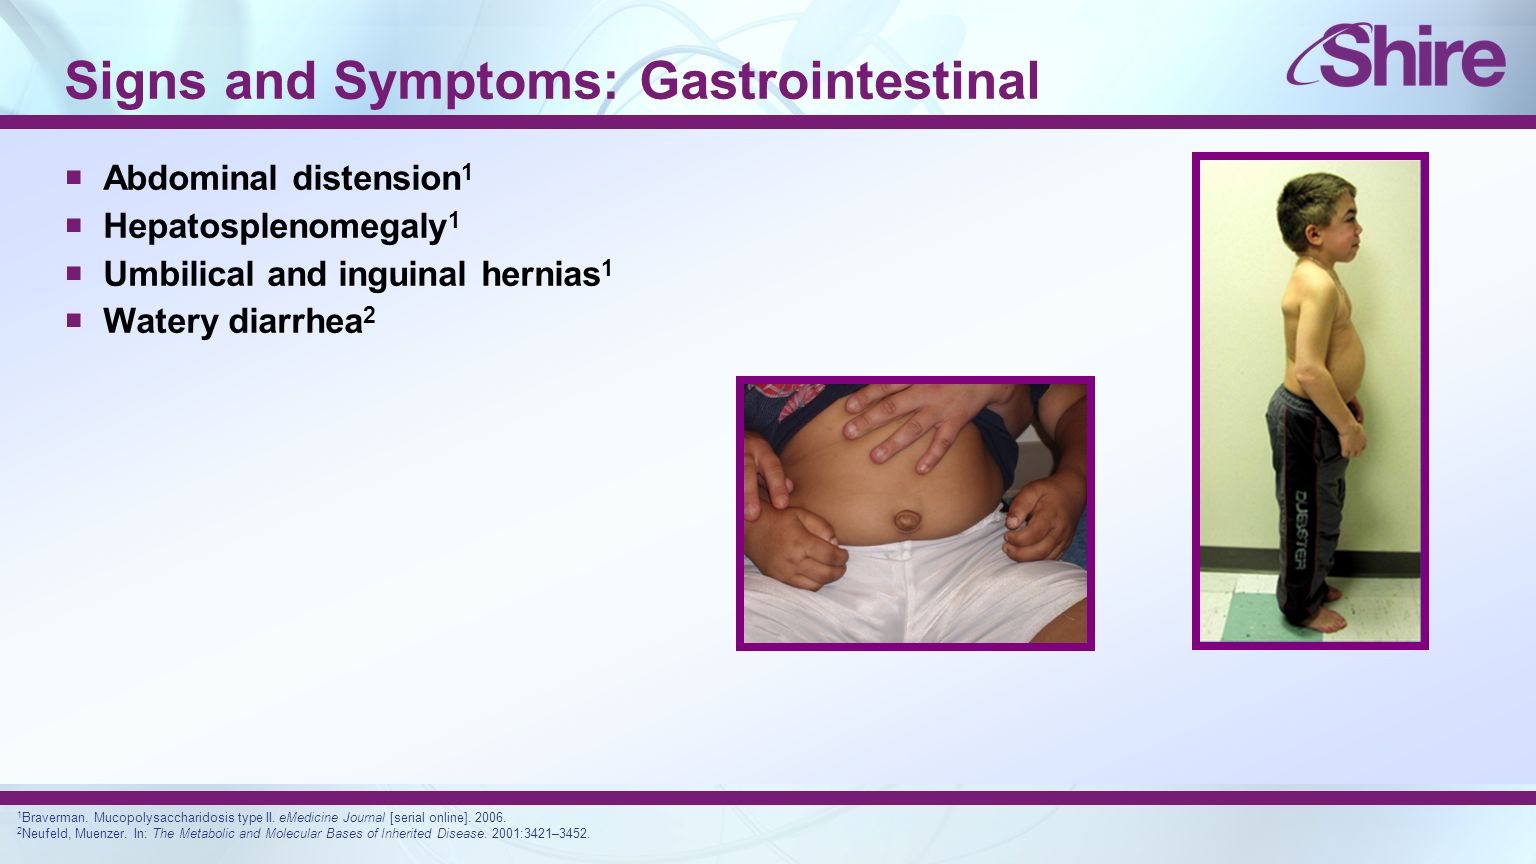 Signs and Symptoms: Gastrointestinal  Abdominal distension 1  Hepatosplenomegaly 1  Umbilical and inguinal hernias 1  Watery diarrhea 2 1 Braverman.